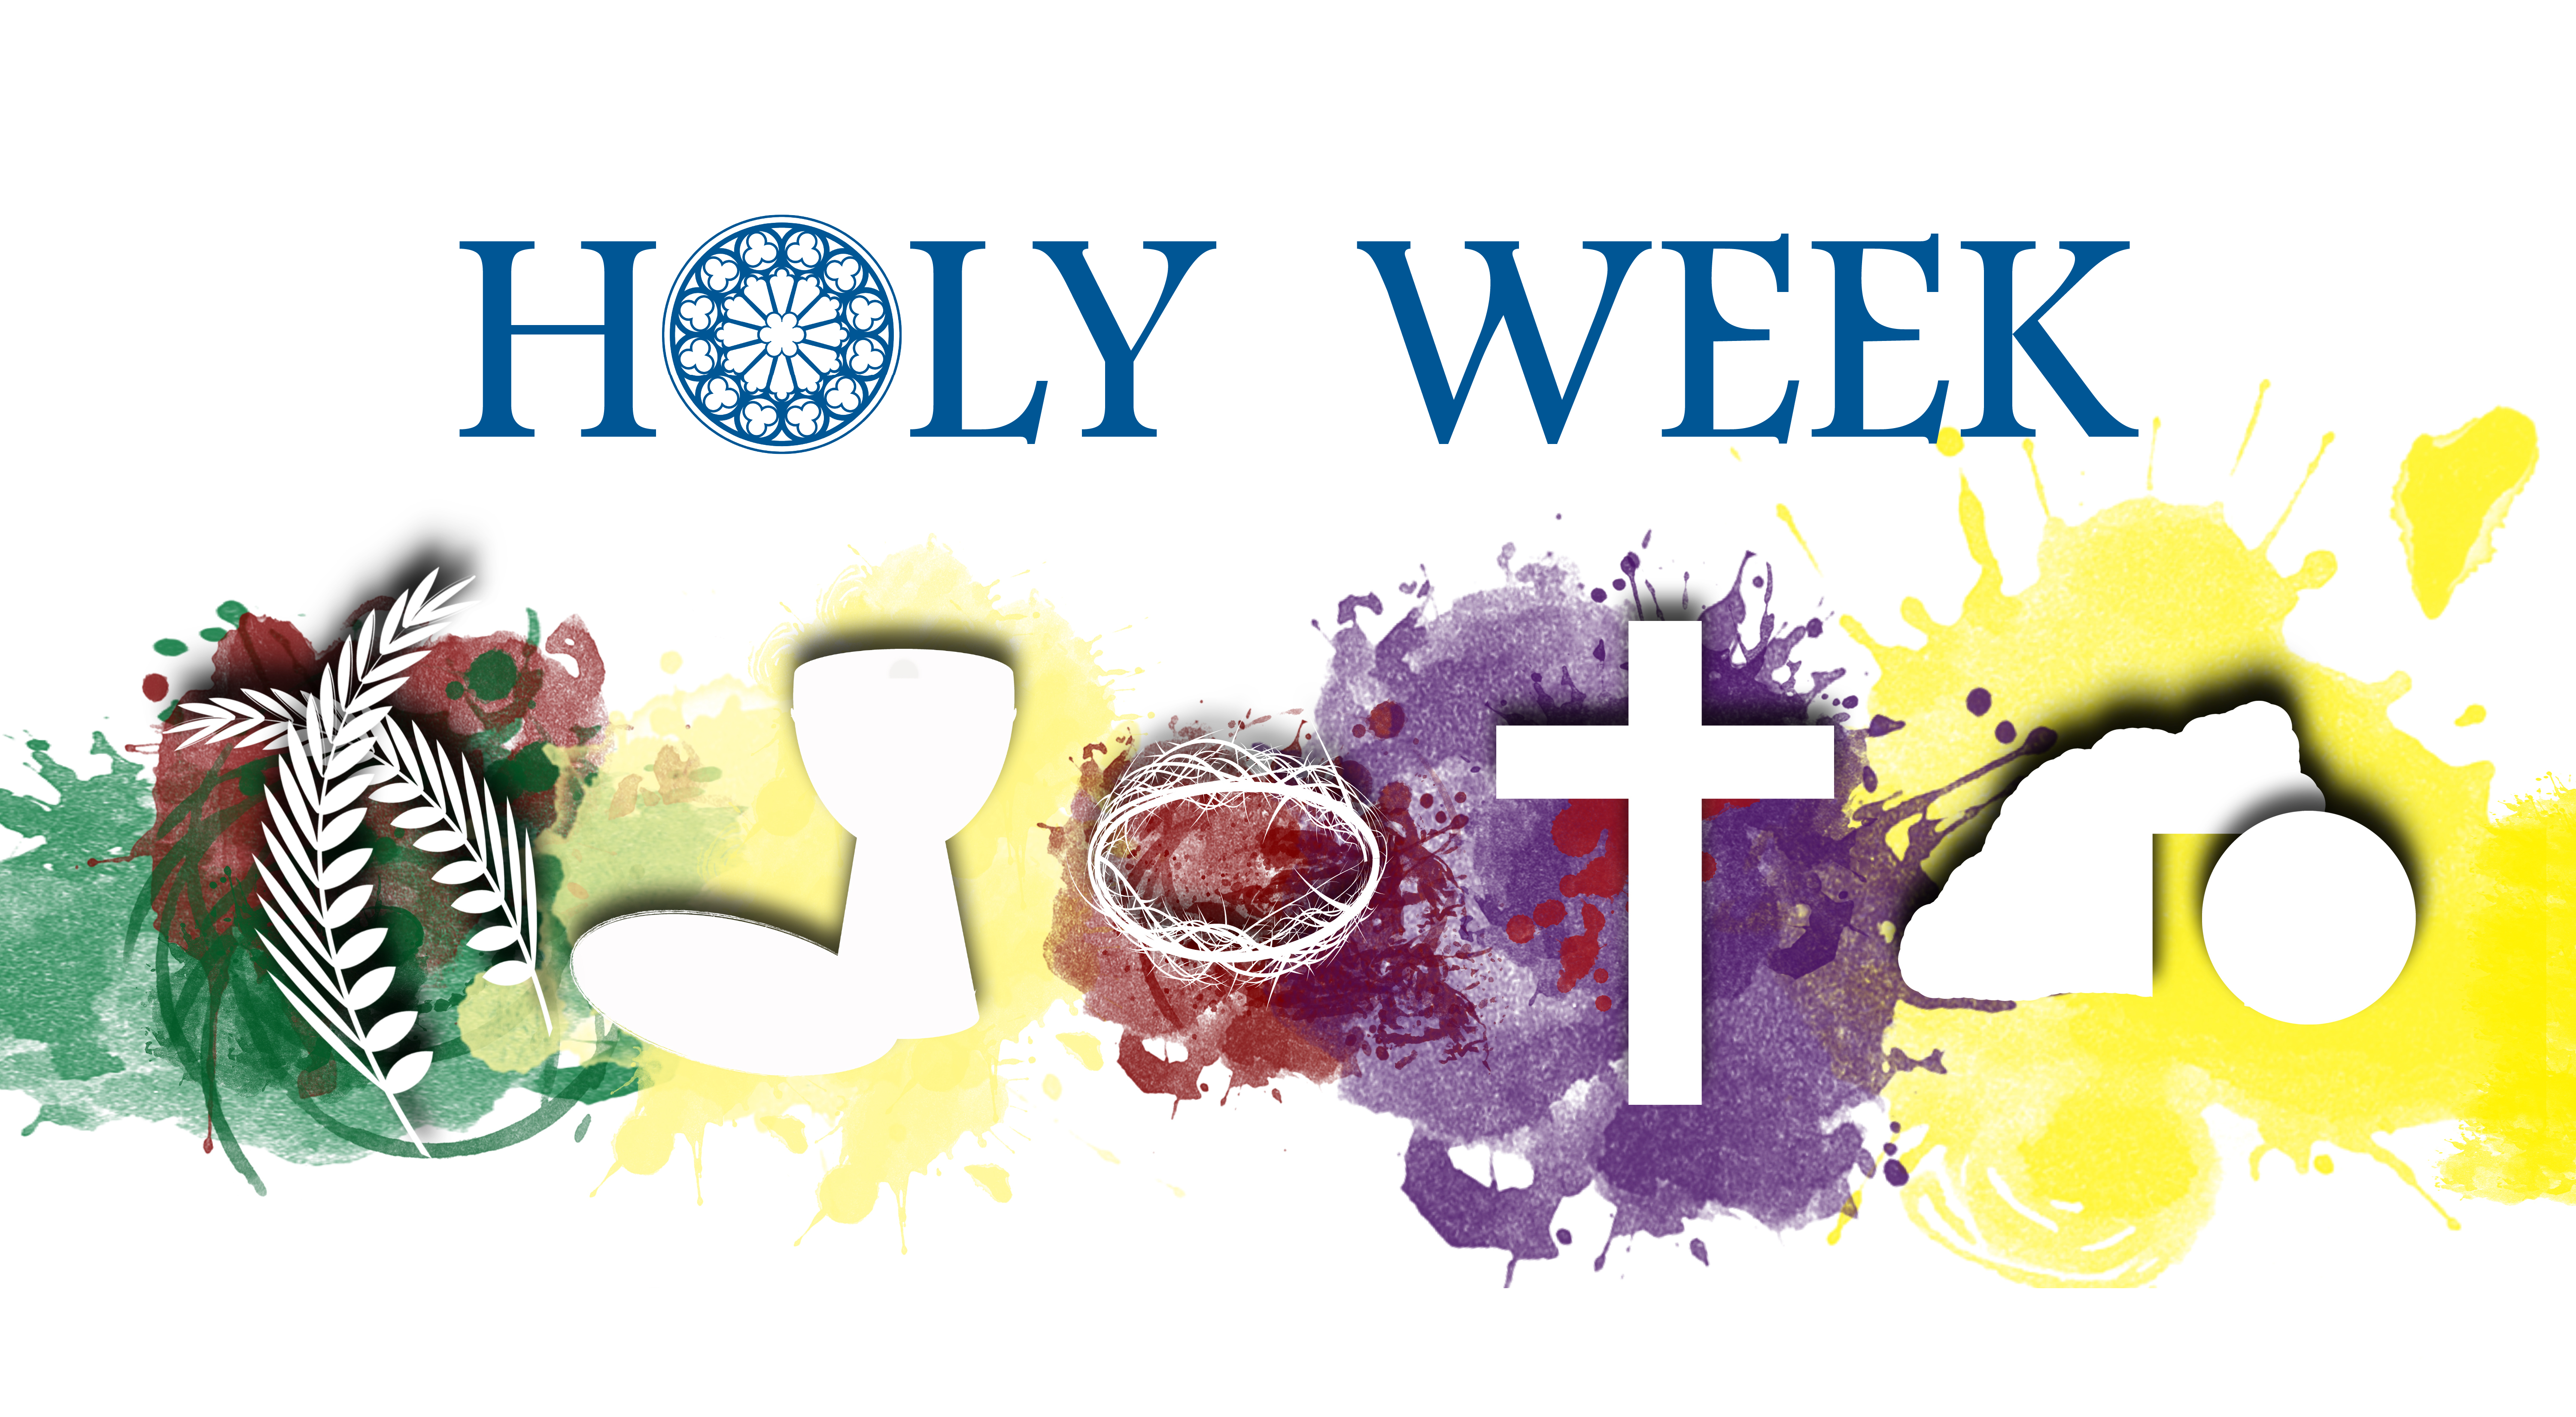 holy week facebook cover photo 2018.